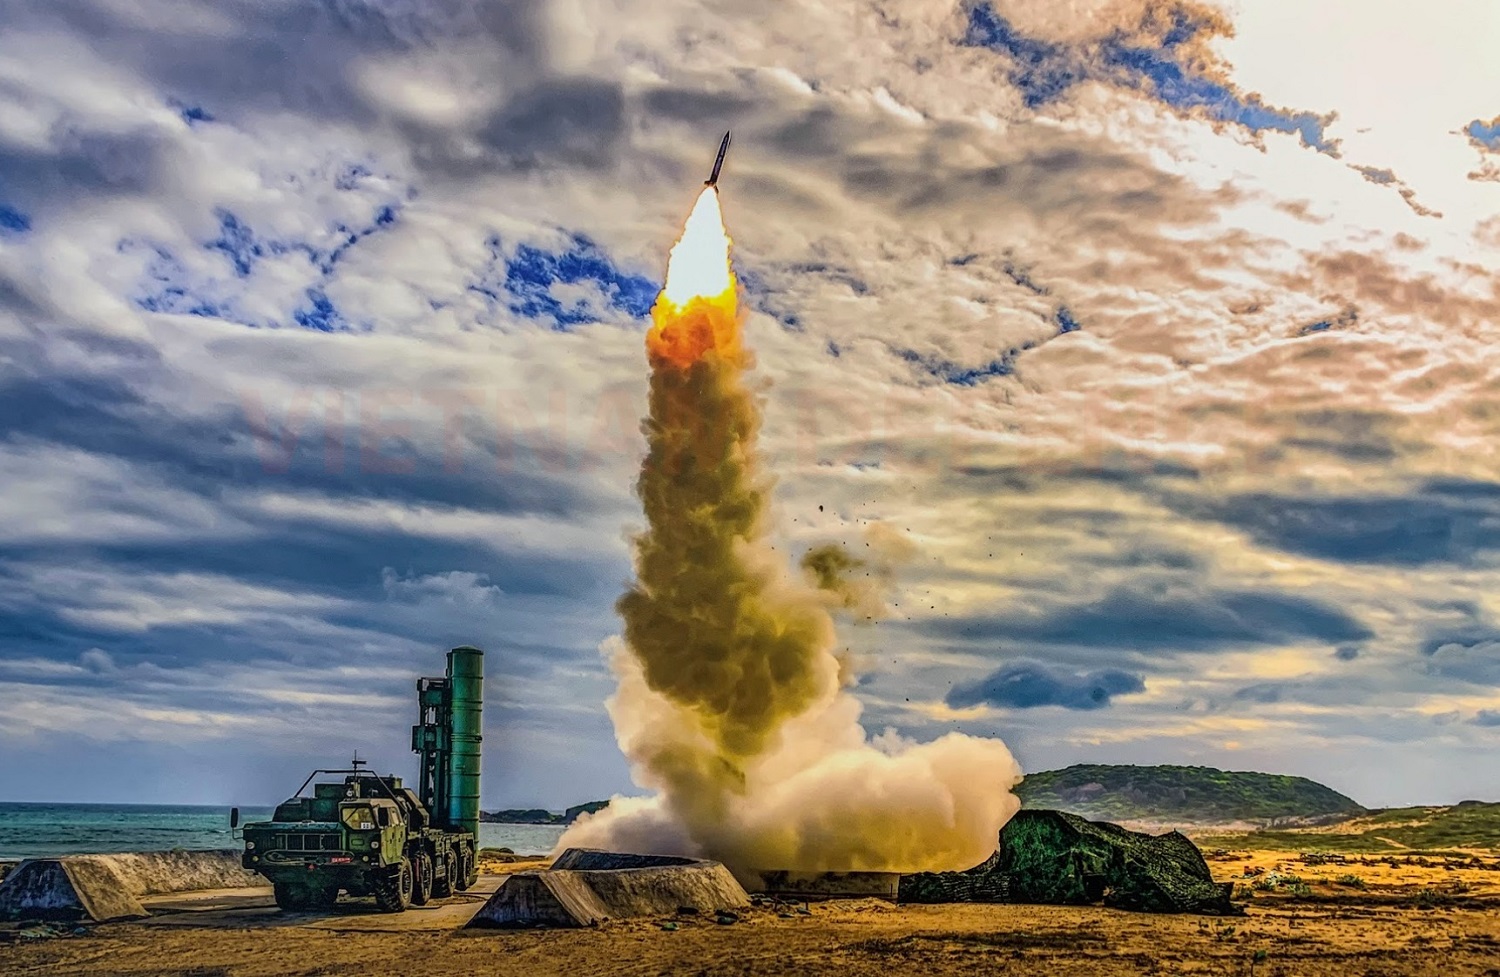 Vietnamese Air Defense Force Conducted Firing of S-300 PMU-1 Long-range Surface-to-air Missile